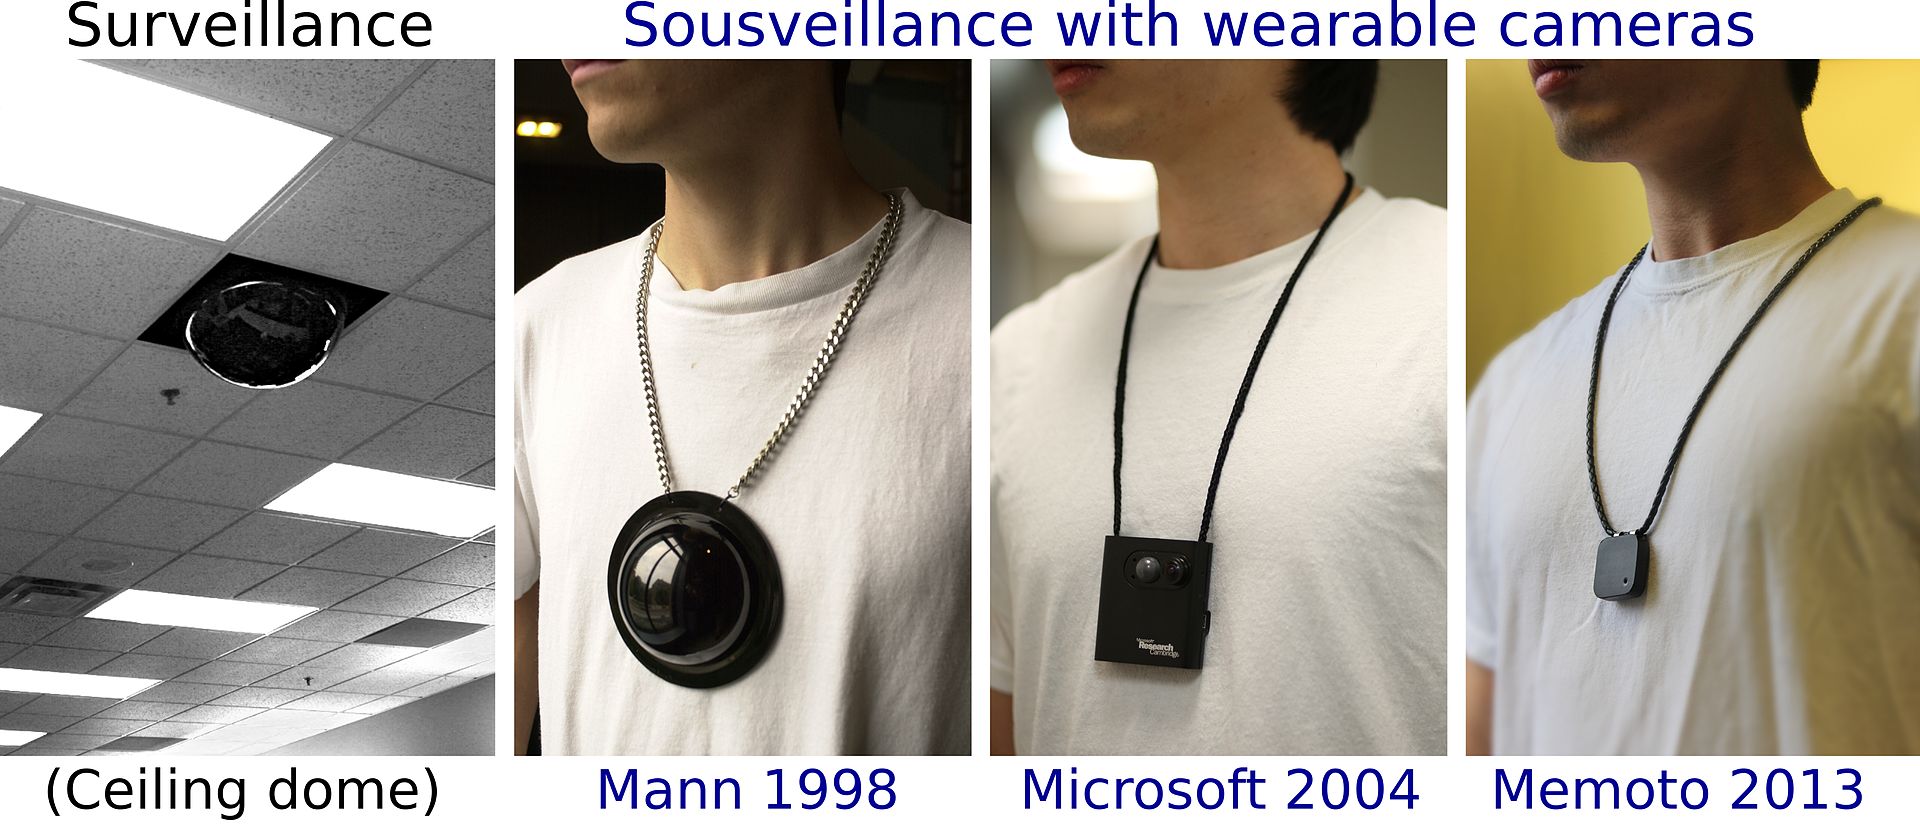 Surveillance as compared with sousveillance (Photo: Wikimedia Commons)